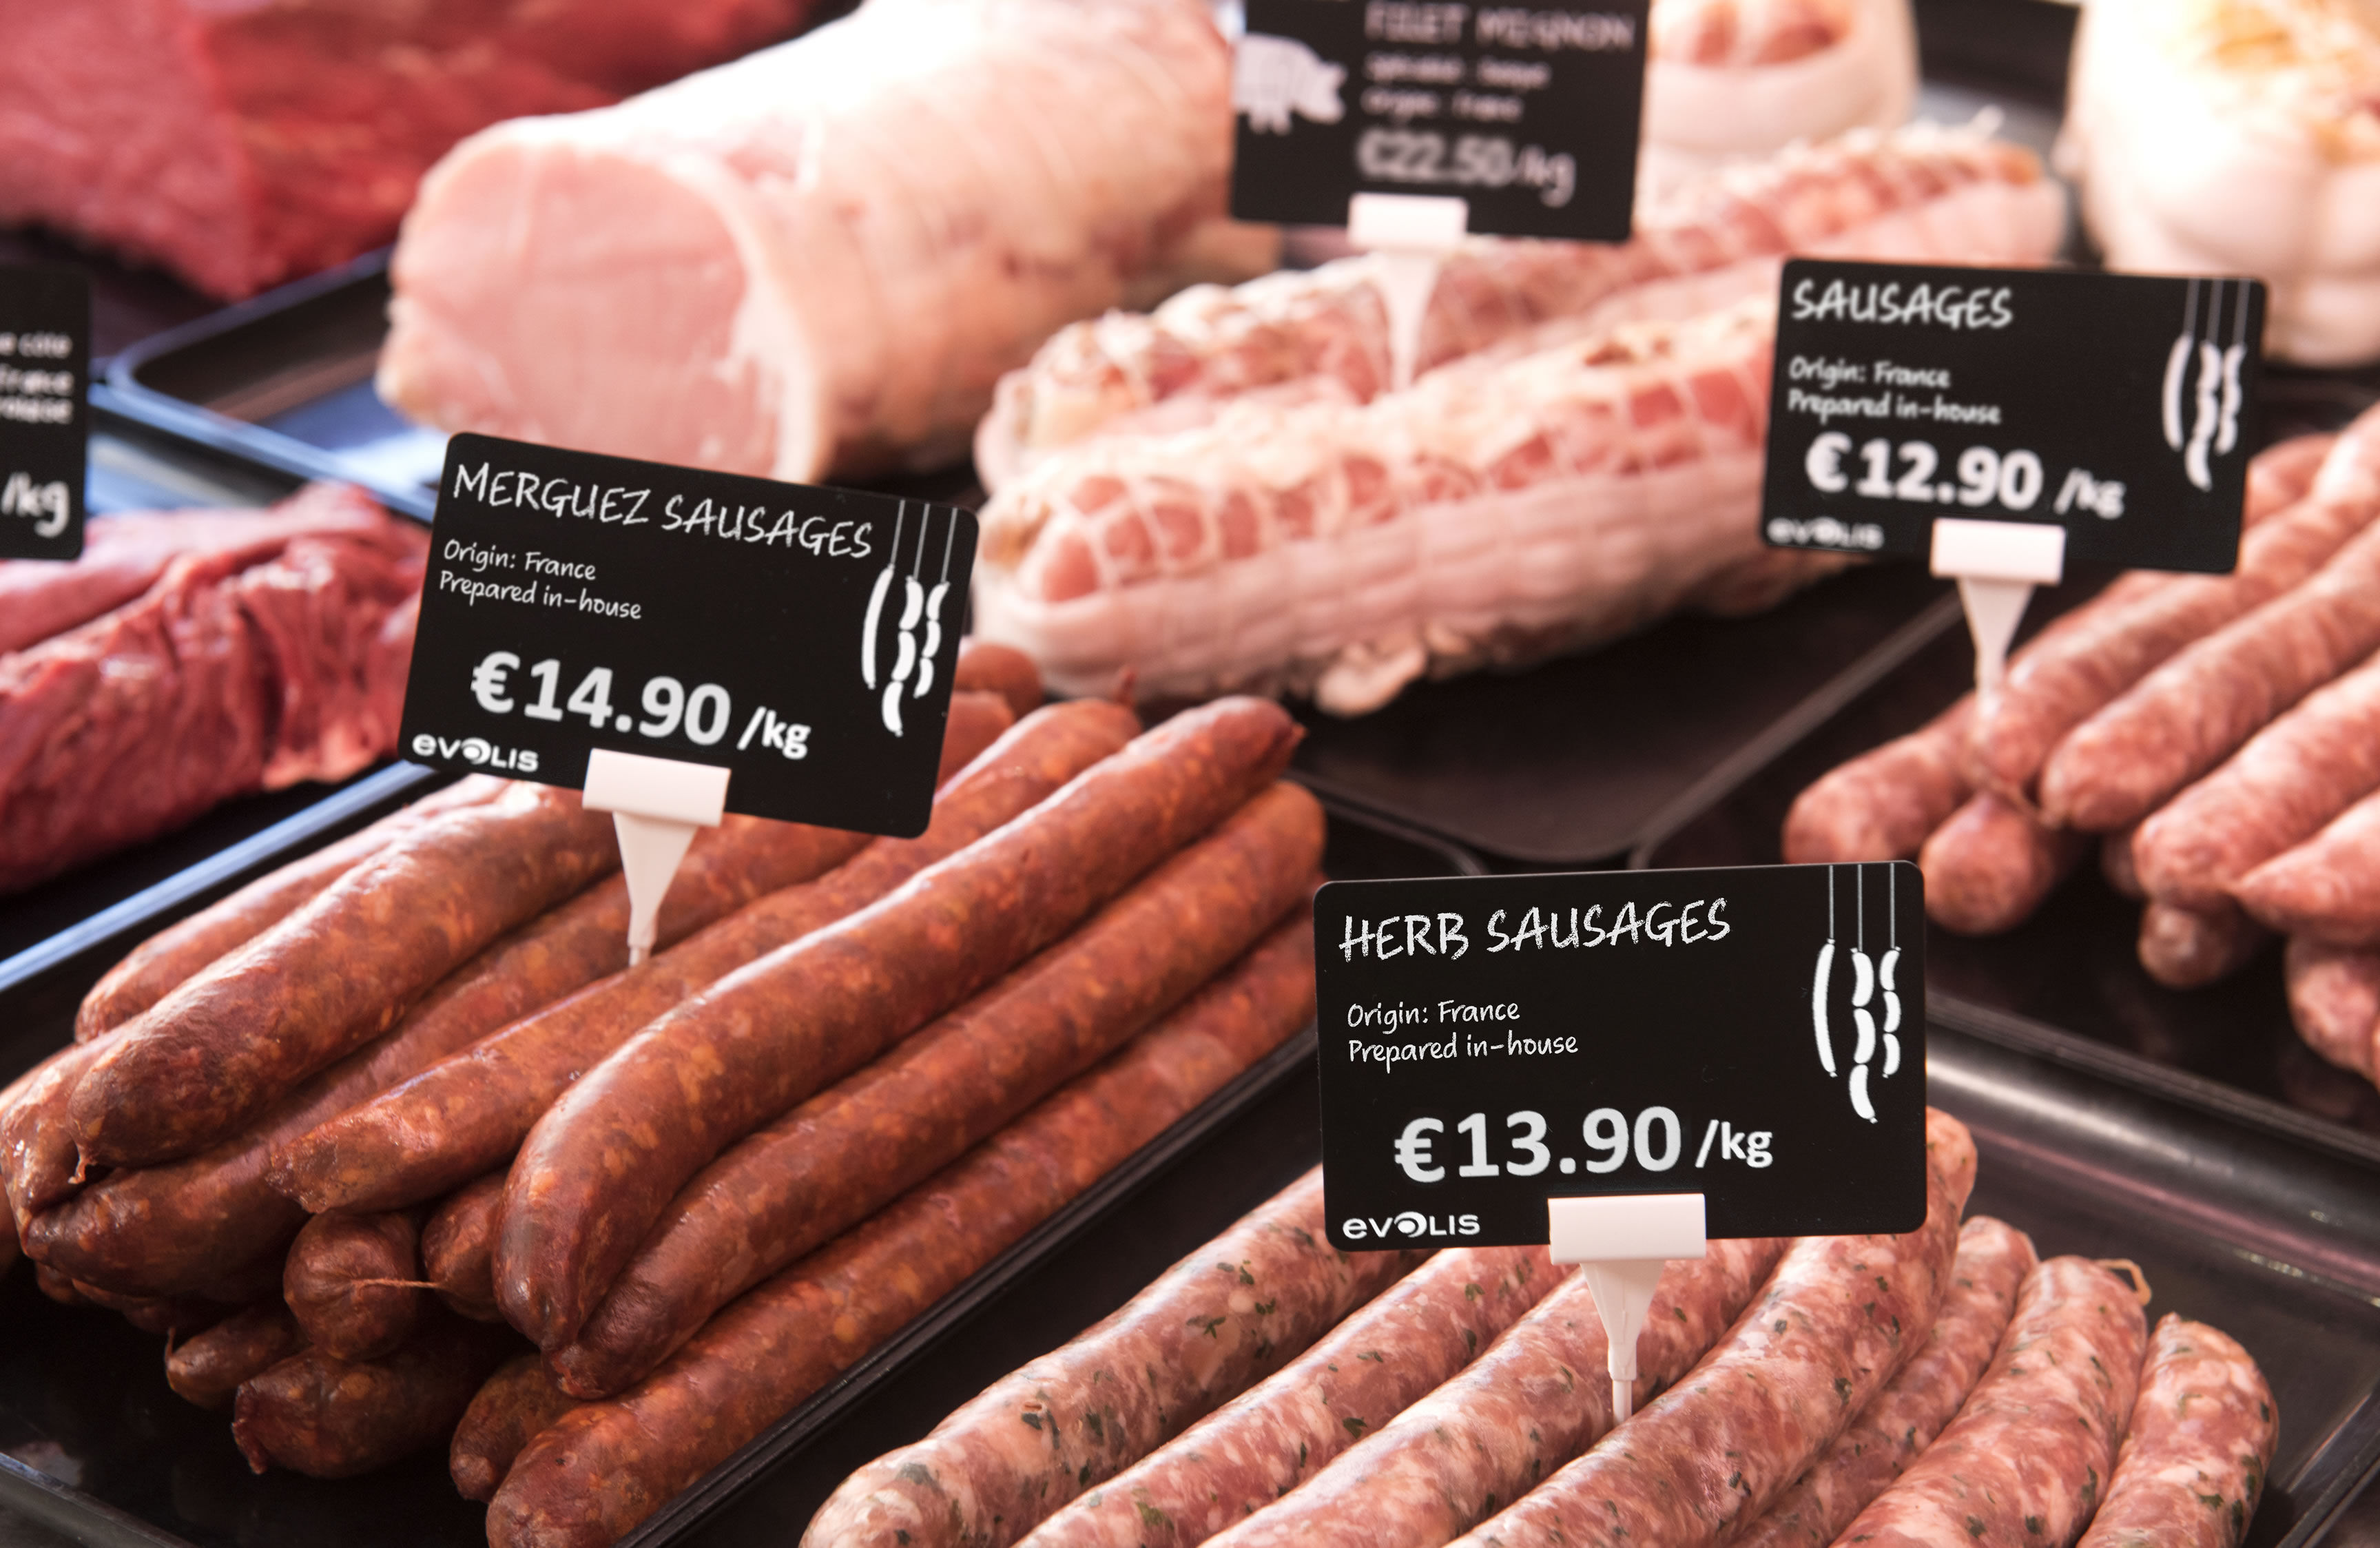 Butcher Sausages Price Tags created by Edikio plastic card printers